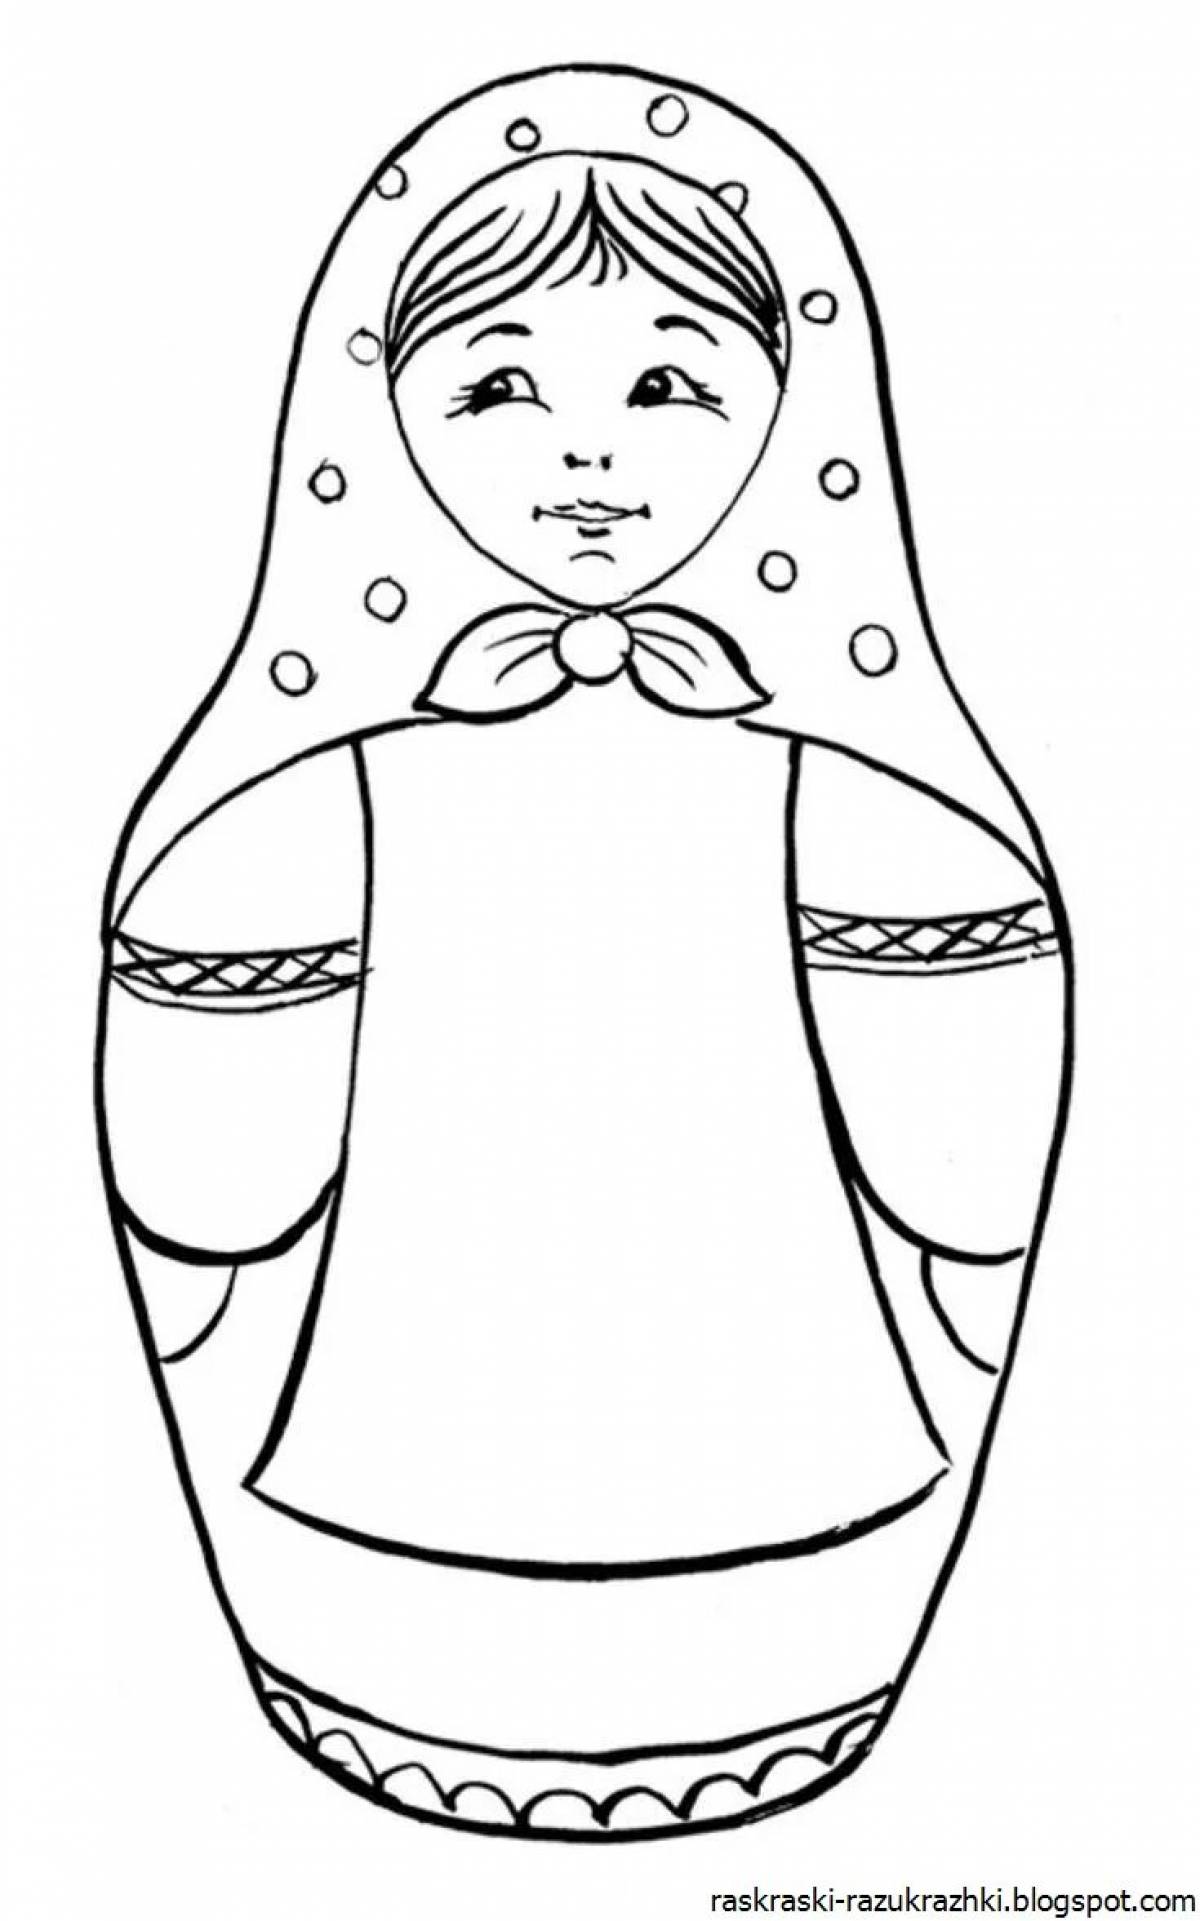 Russian doll for children #2